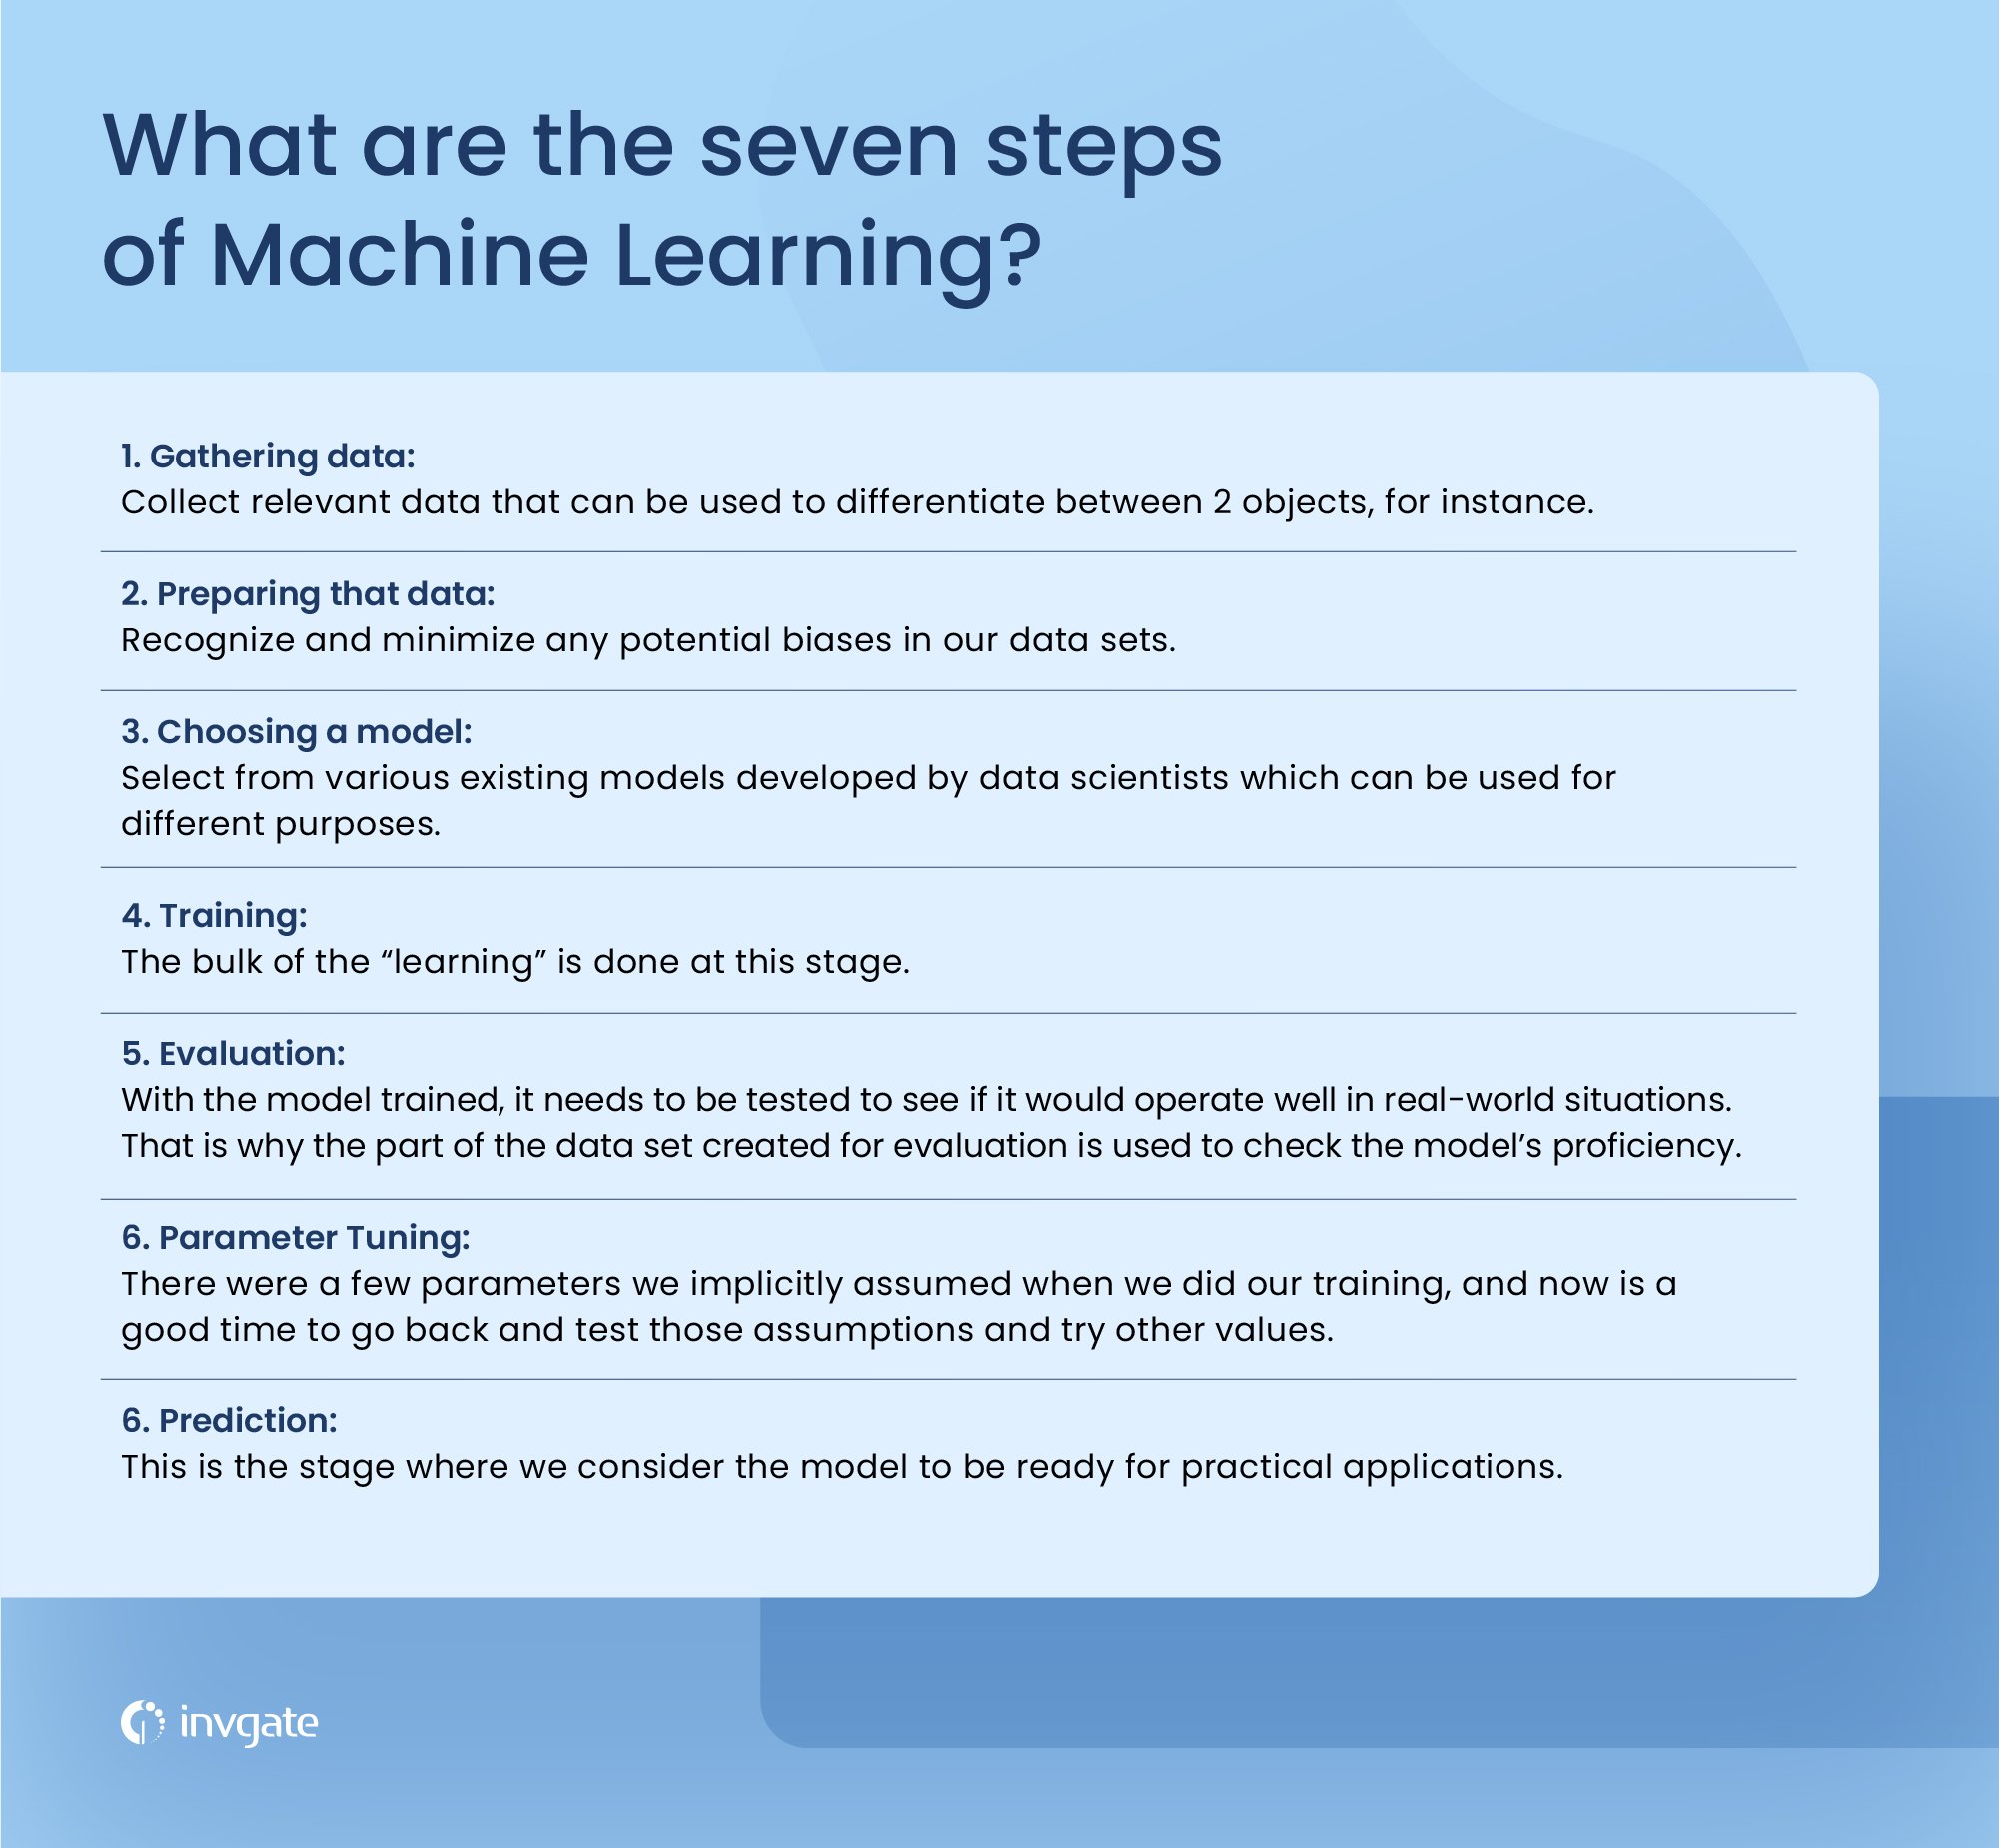 With these steps, Machine Learning can automate mundane tasks and offer intelligent insights.